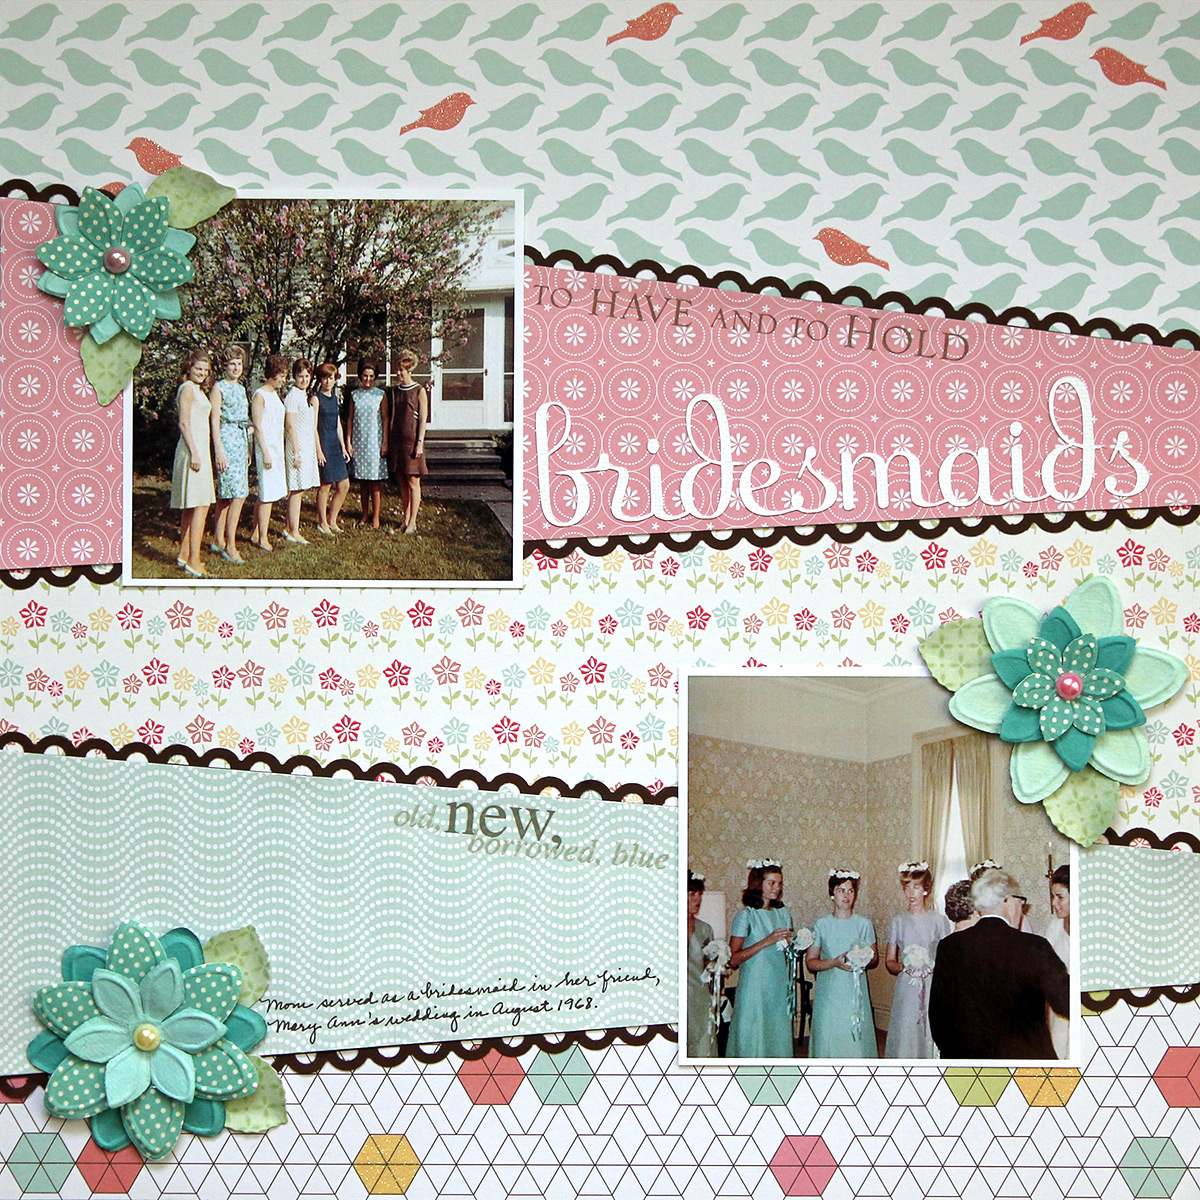 1968 bridesmaids is a two-photo scrapbook page made with American Crafts papers and a sketch by Heather Leopard.